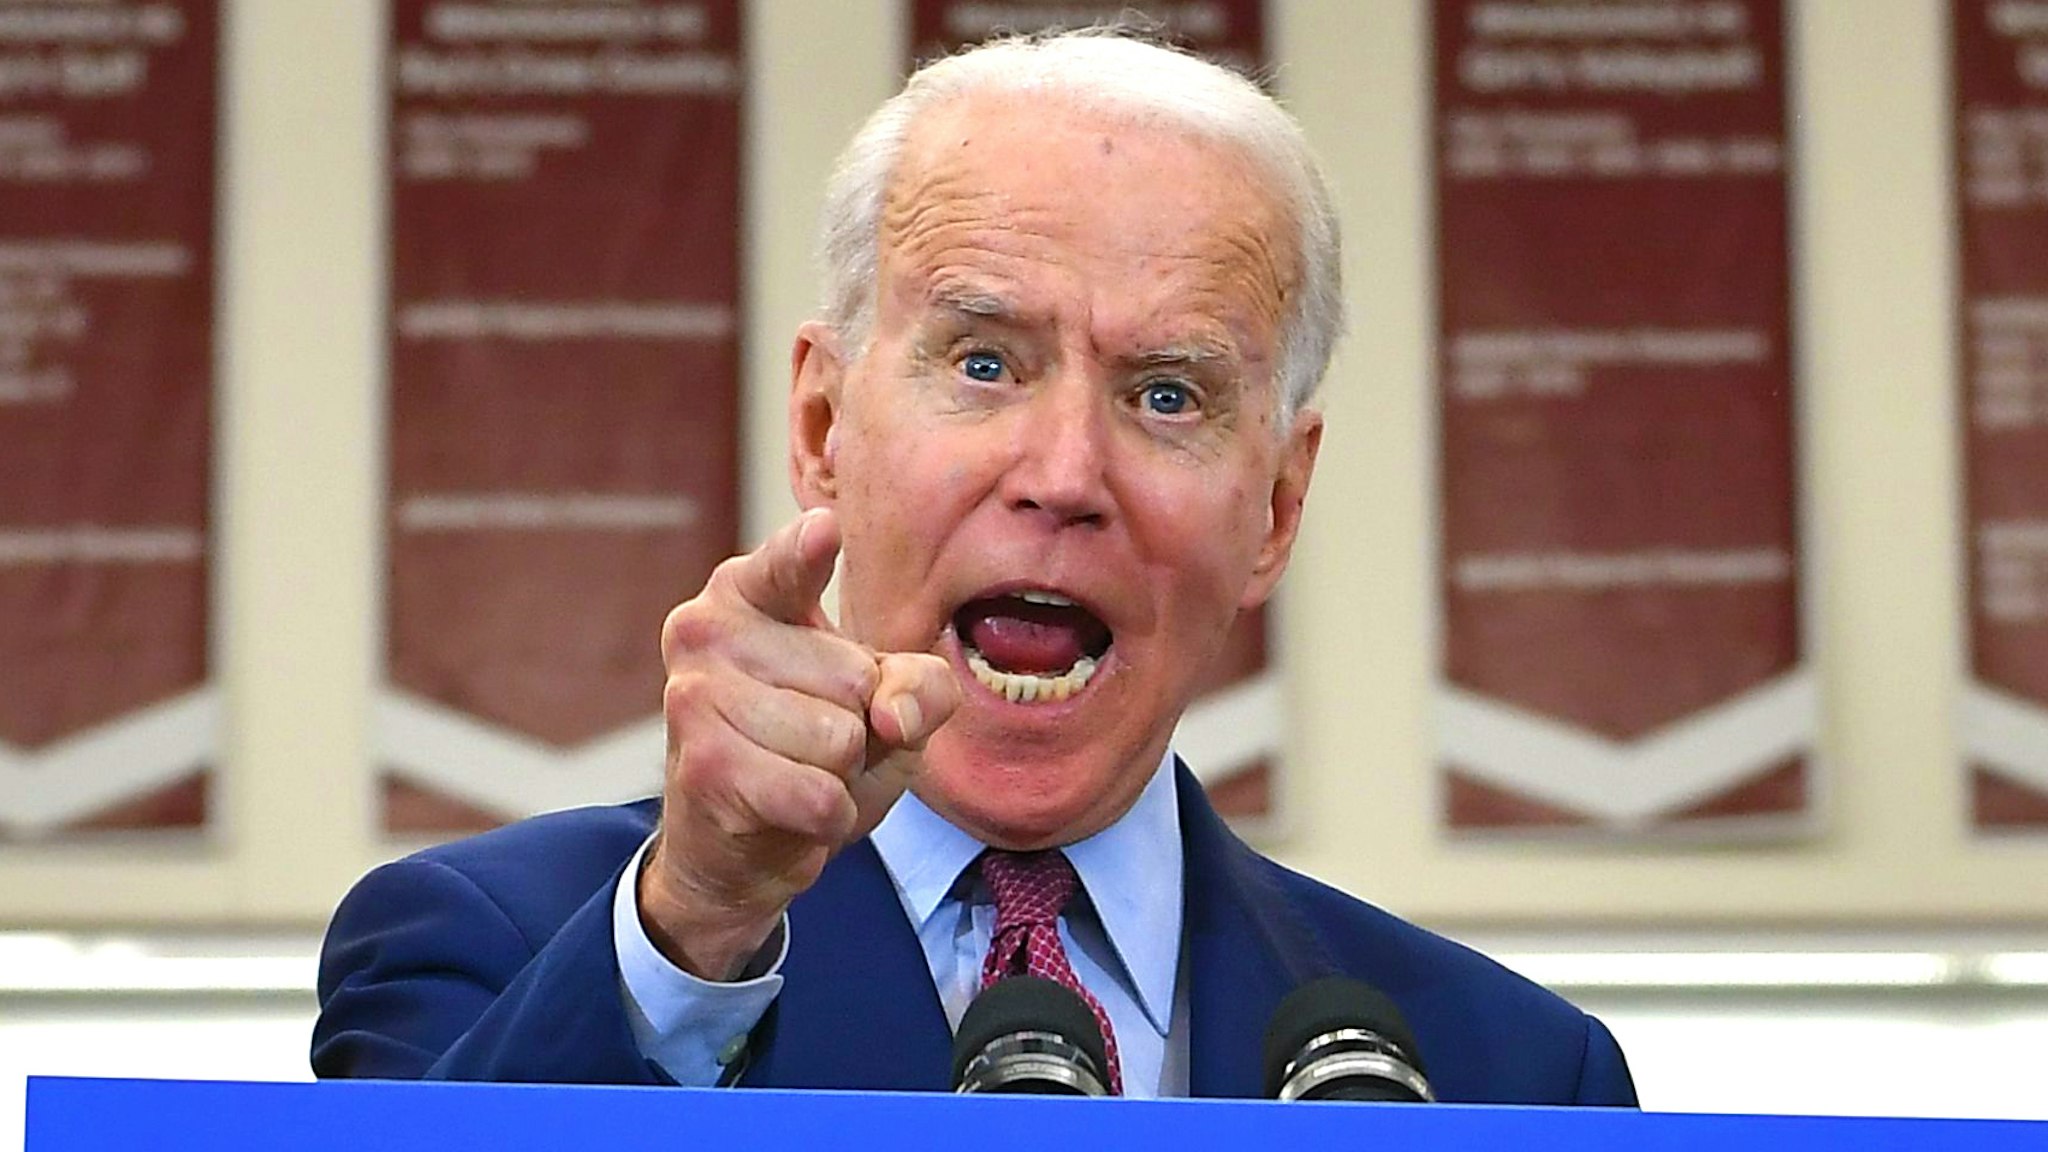 Democratic presidential candidate former Vice President Joe Biden gestures as he speaks during a campaign rally at Renaissance High School in Detroit, Michigan on March 9, 2020.